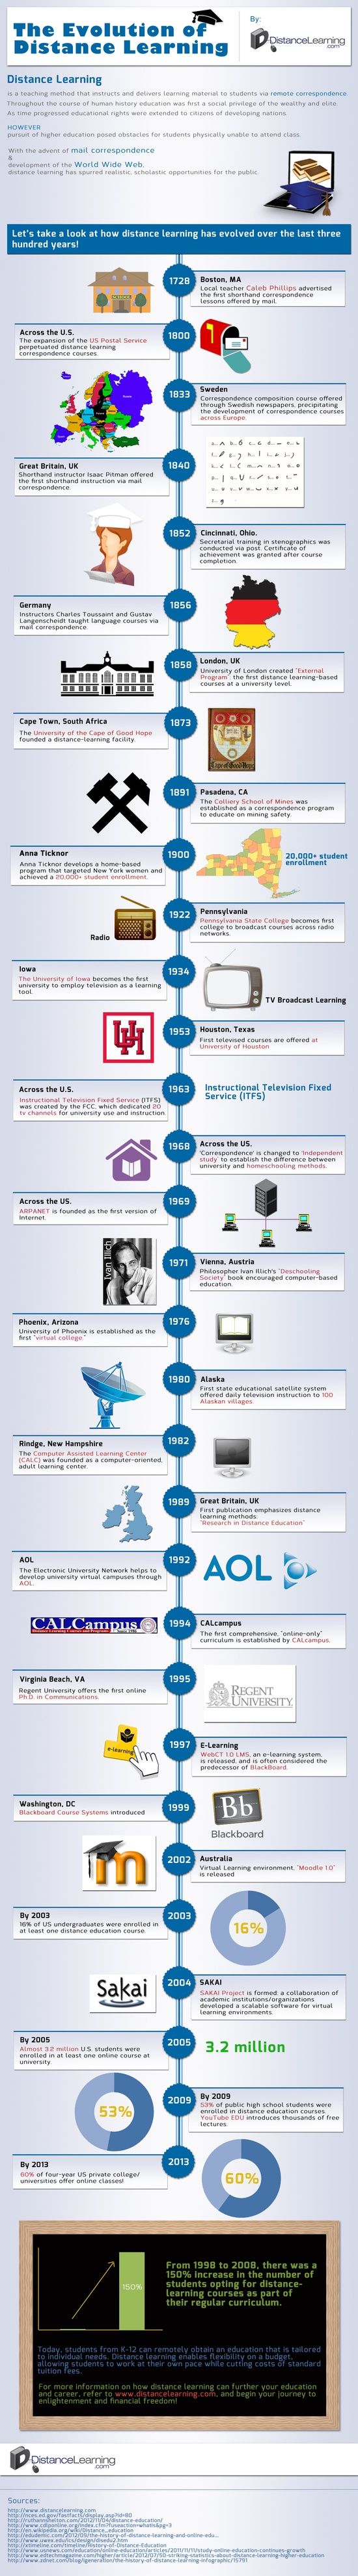 Educational infographic : distance learning evolution ...